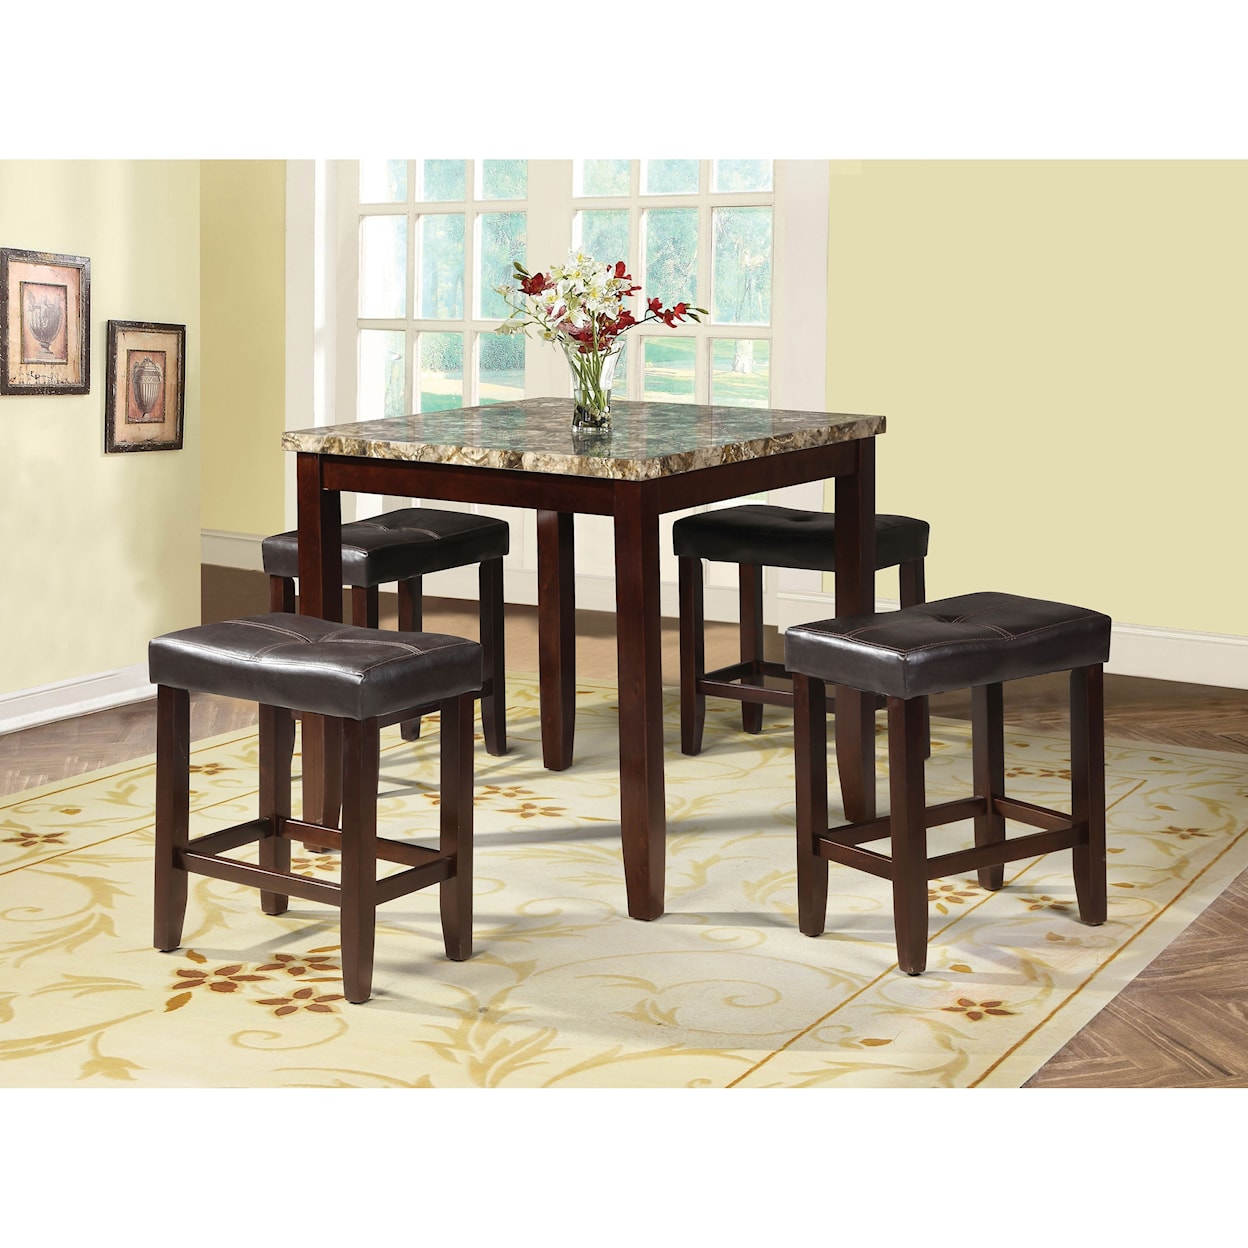 Acme Furniture Rolle Counter Height Dining Set with 4 Chairs